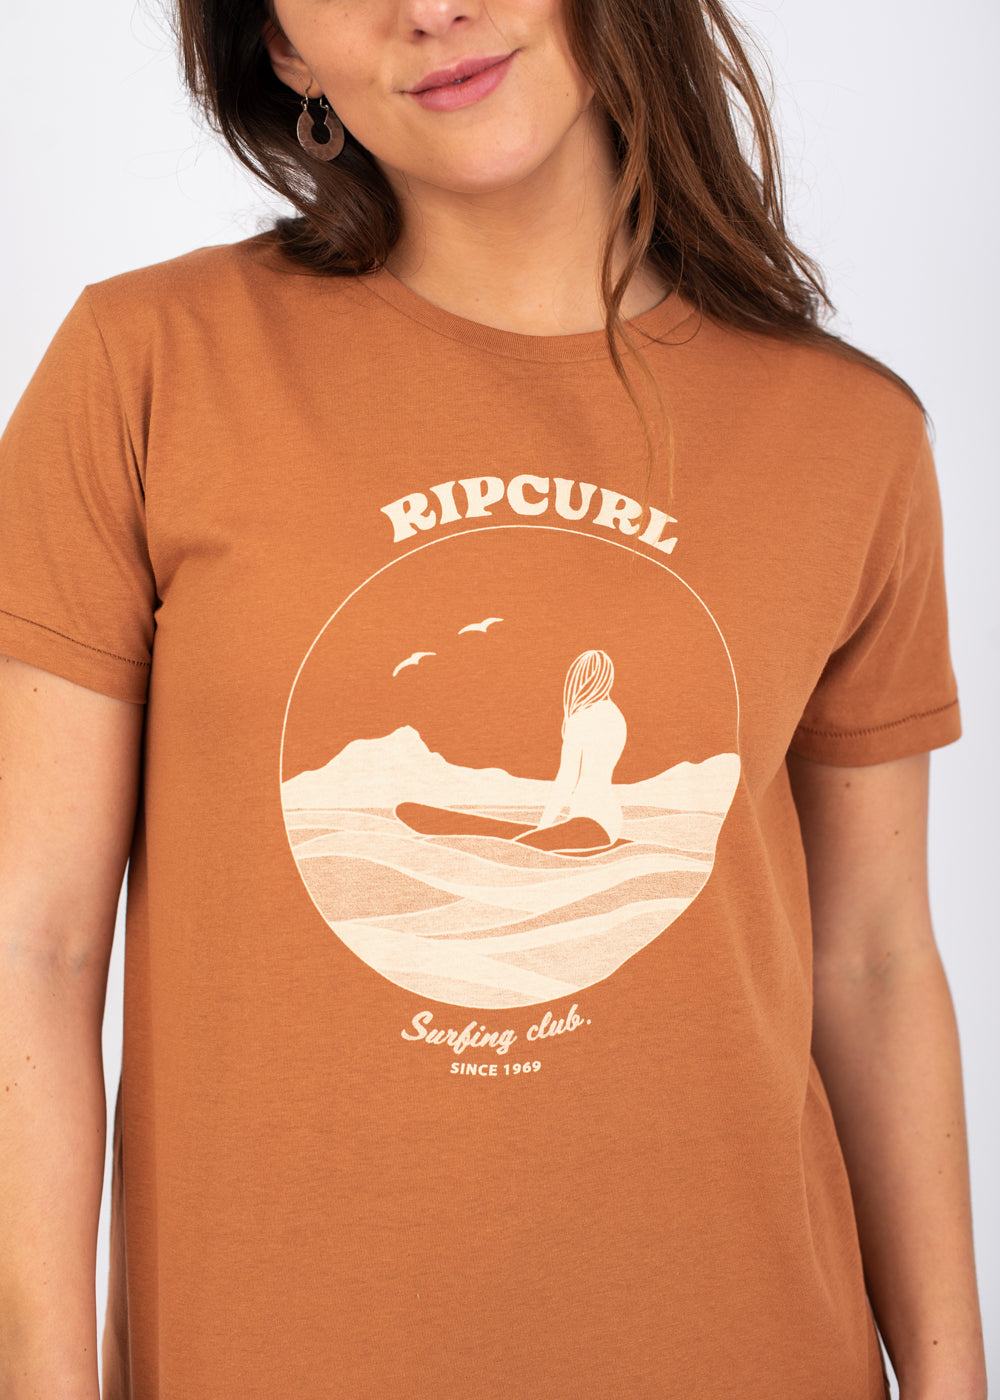 SAVE BIG on Re-Entry Crew Neck Tee in Light Brown by Rip Curl Rip Curl .  Shop for the best items at a great price and get outstanding service